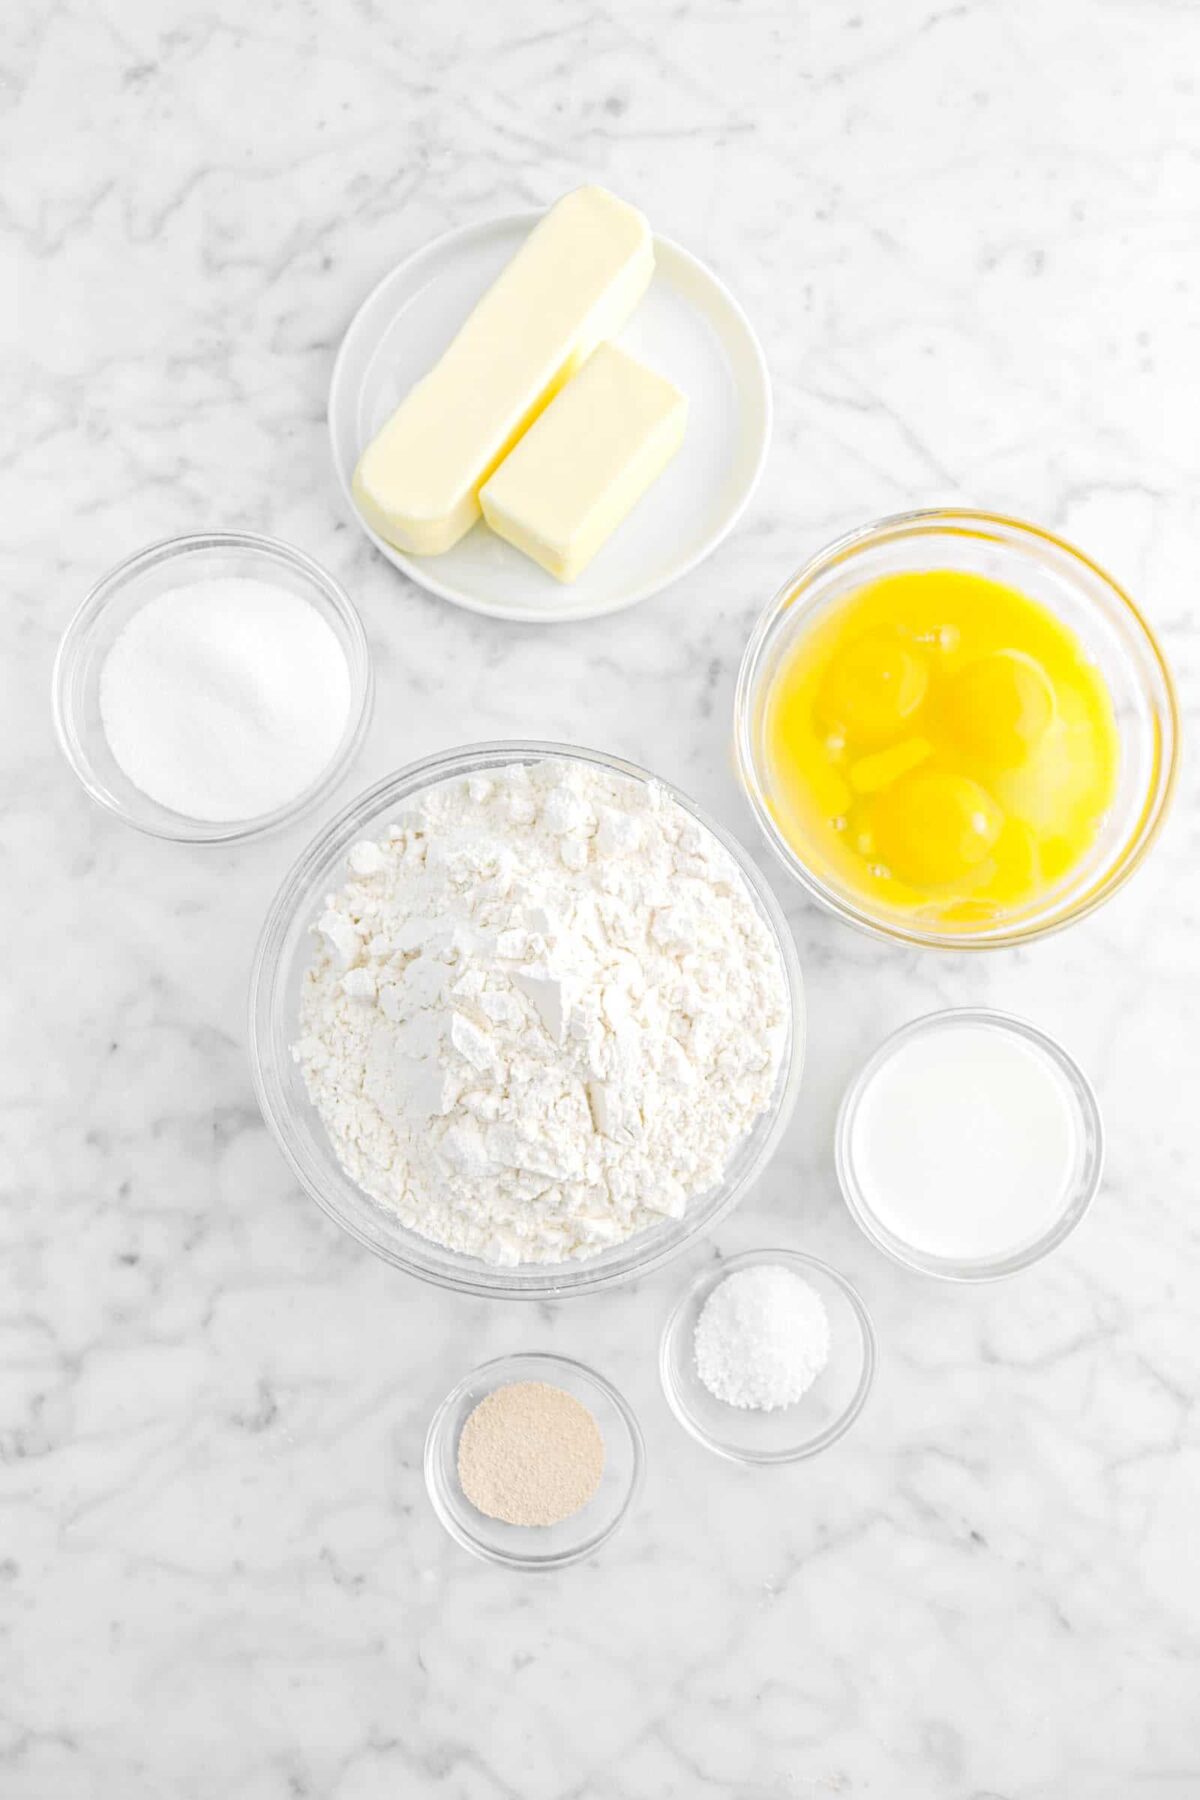 butter, sugar, eggs, flour, milk, salt, and yeast on marble counter